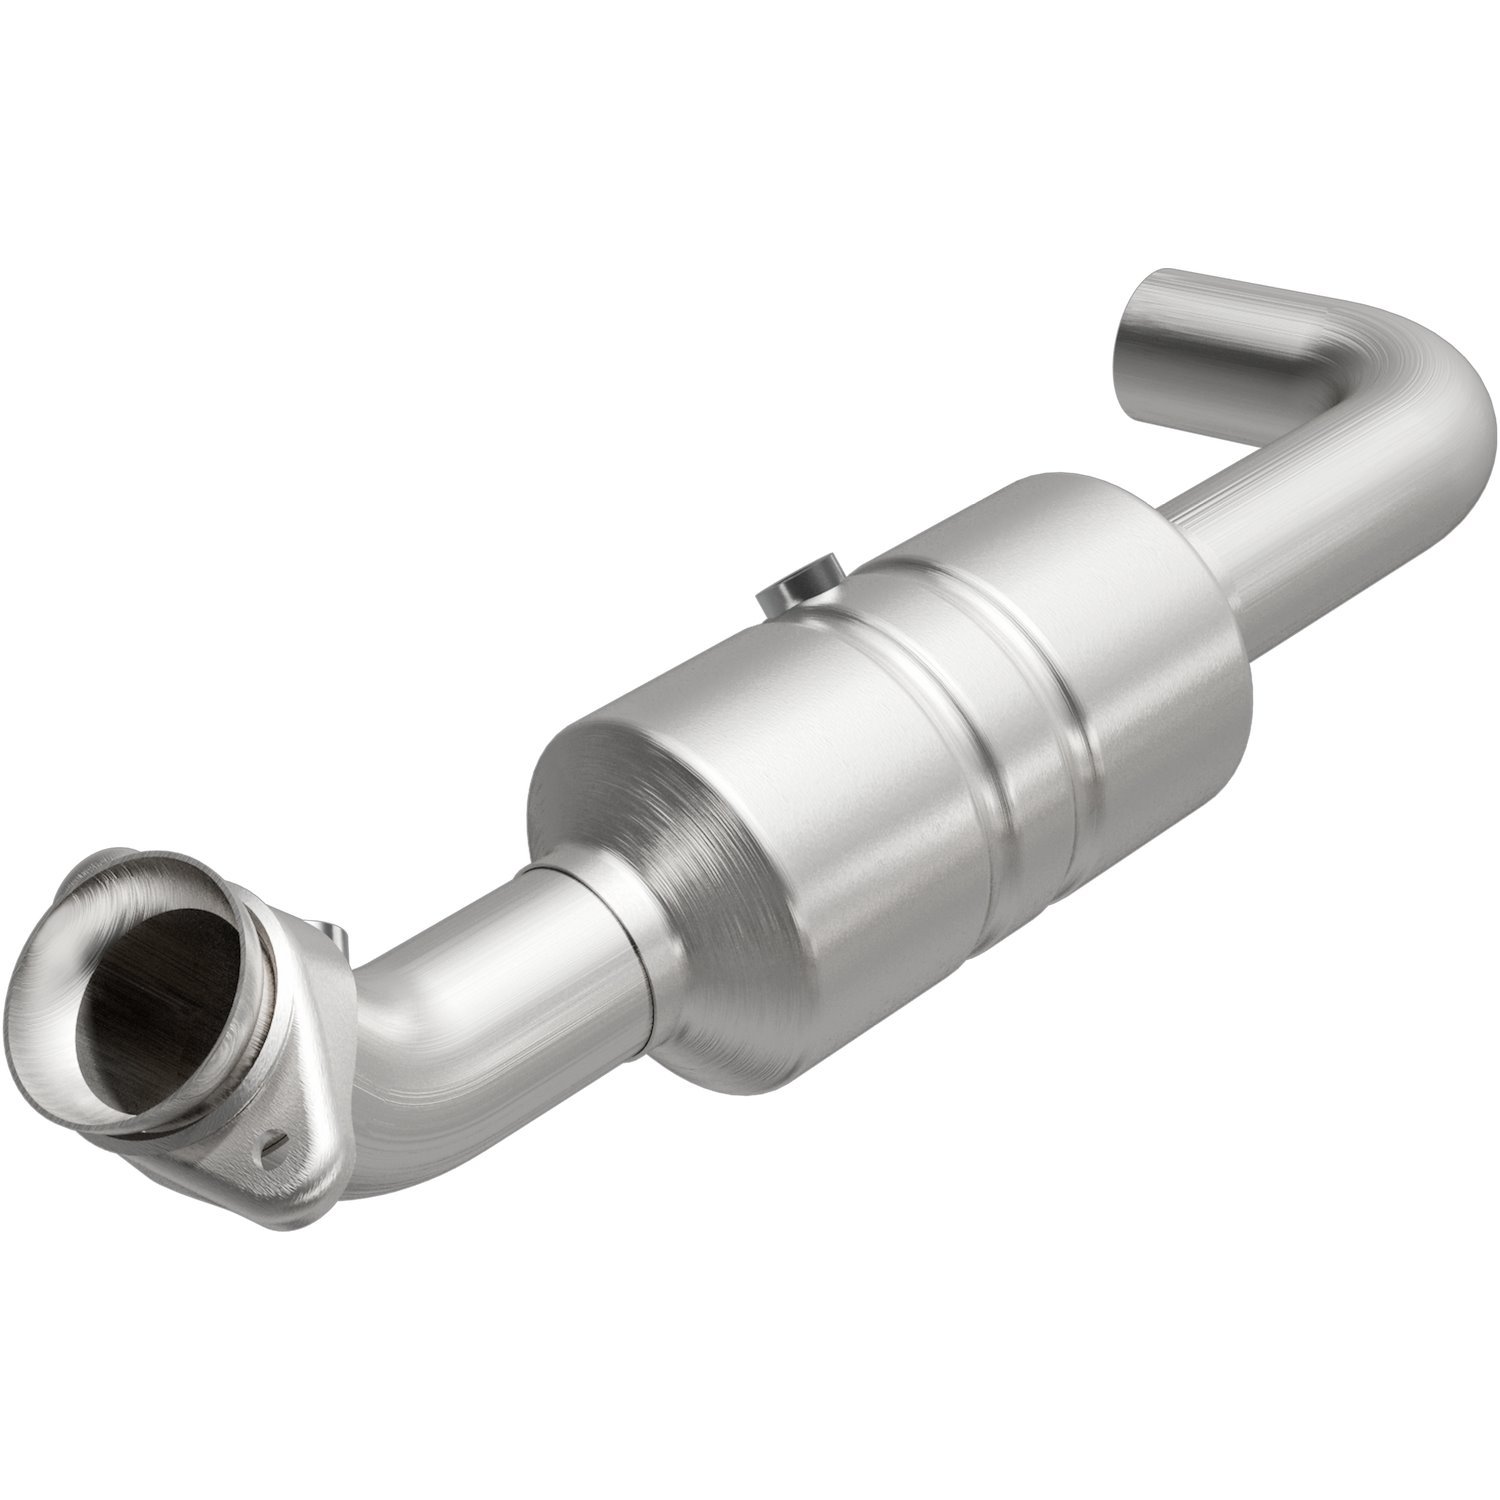 OEM Grade Federal / EPA Compliant Direct-Fit Catalytic Converter 52419